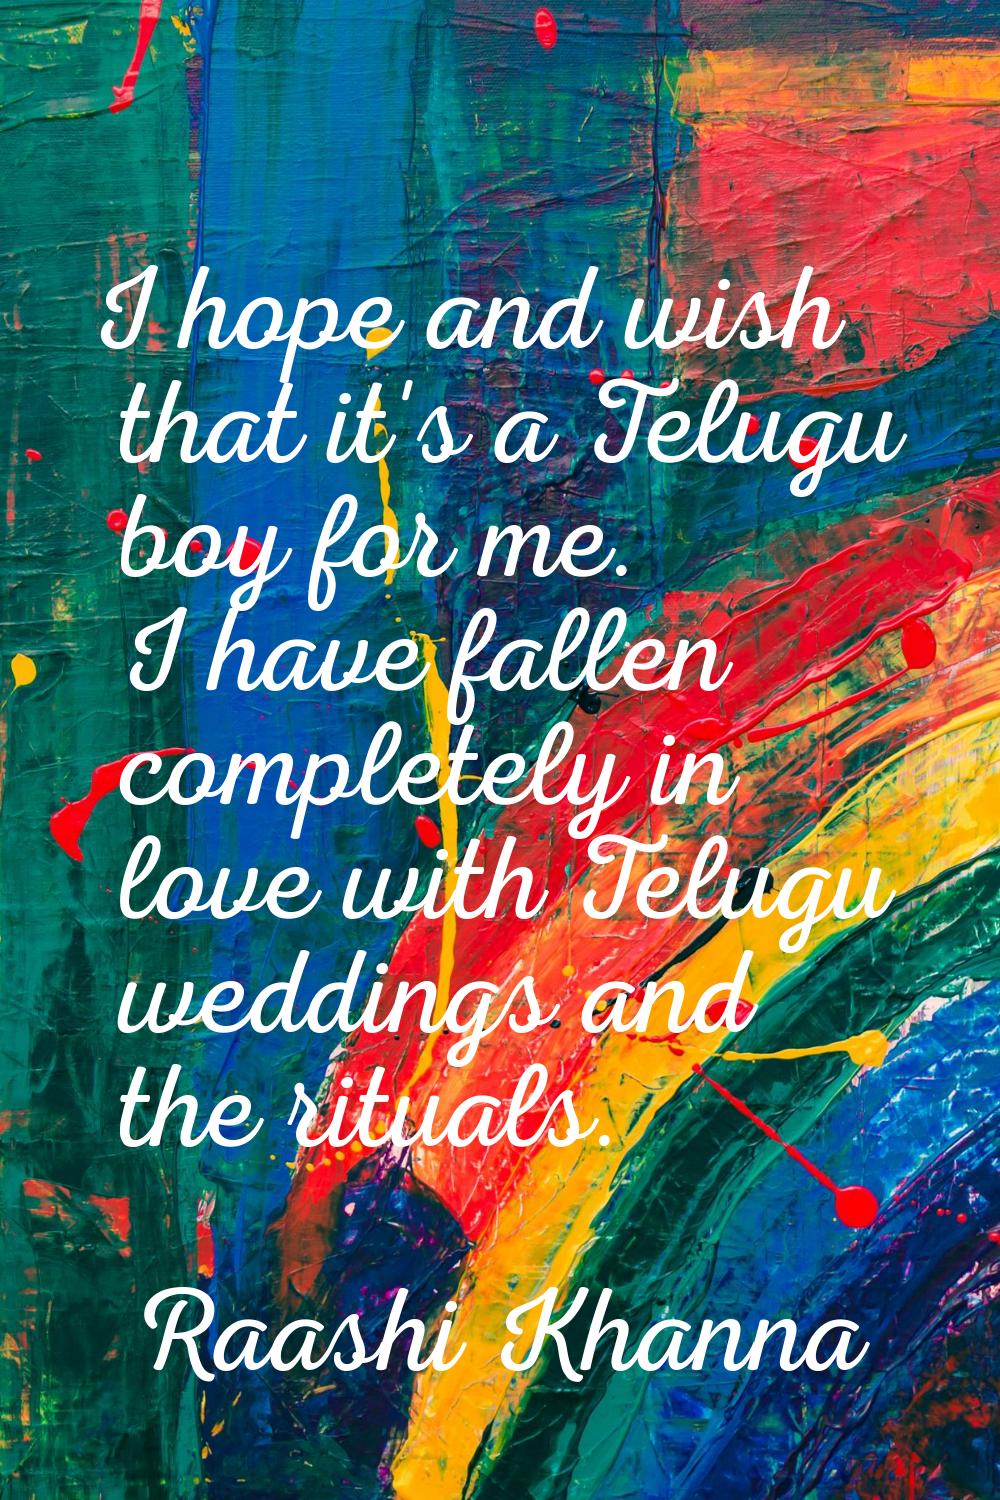 I hope and wish that it's a Telugu boy for me. I have fallen completely in love with Telugu wedding